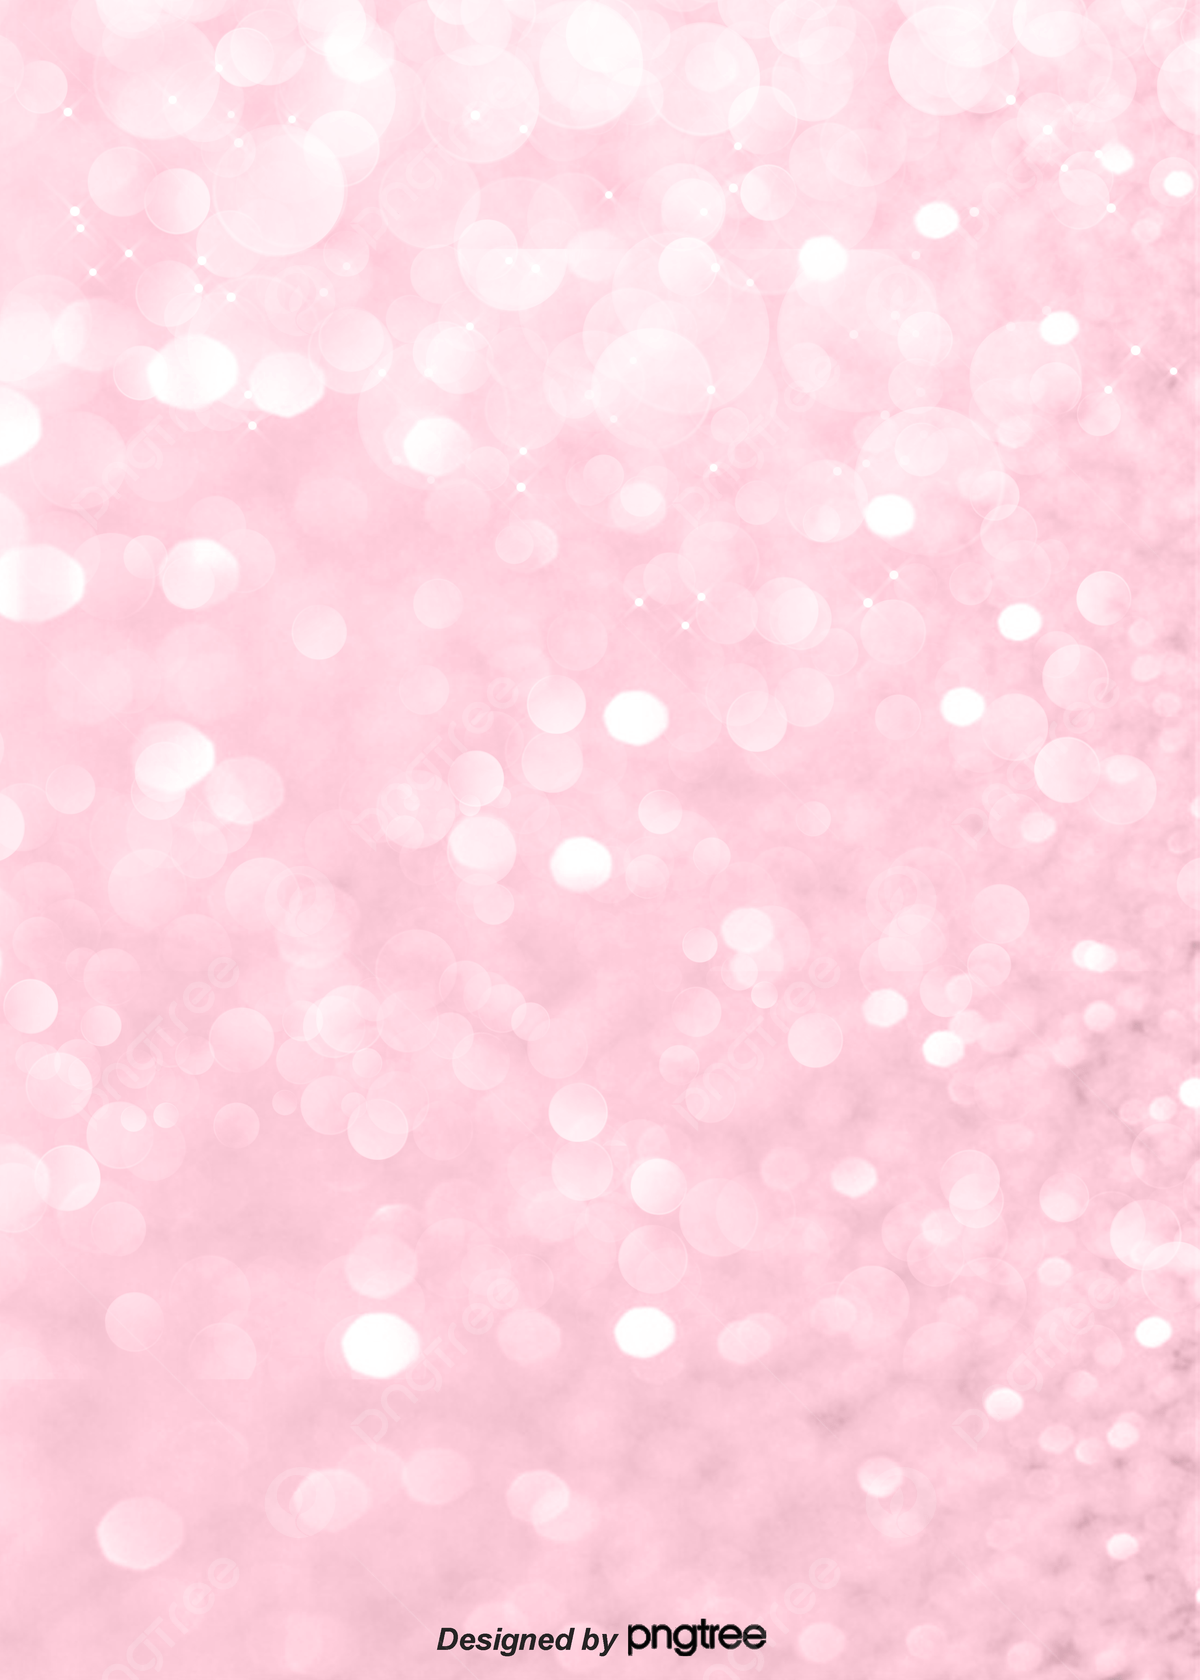 False Background Of Pink Aesthetic Spot Wallpaper Image For Free Download